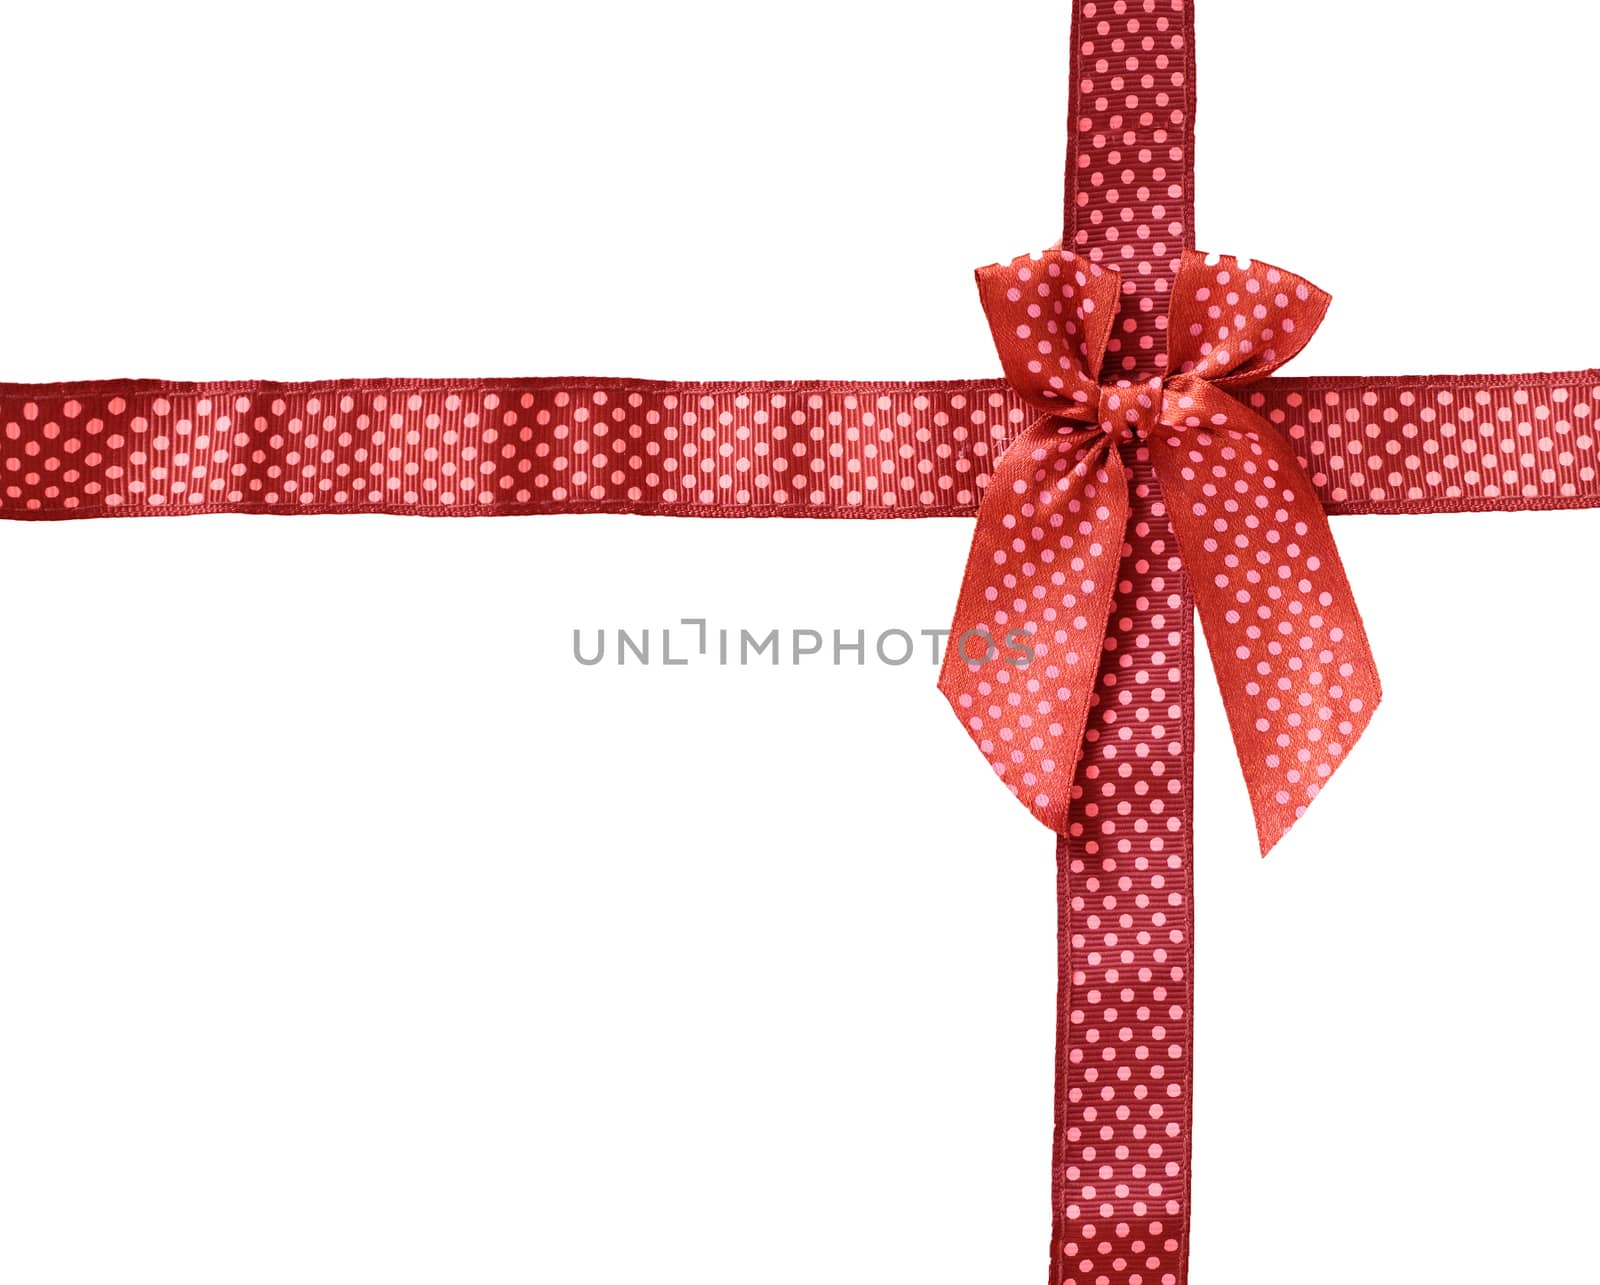 Shiny Ribbon red (bow) gird box frame isolated on white backgrou by jayzynism